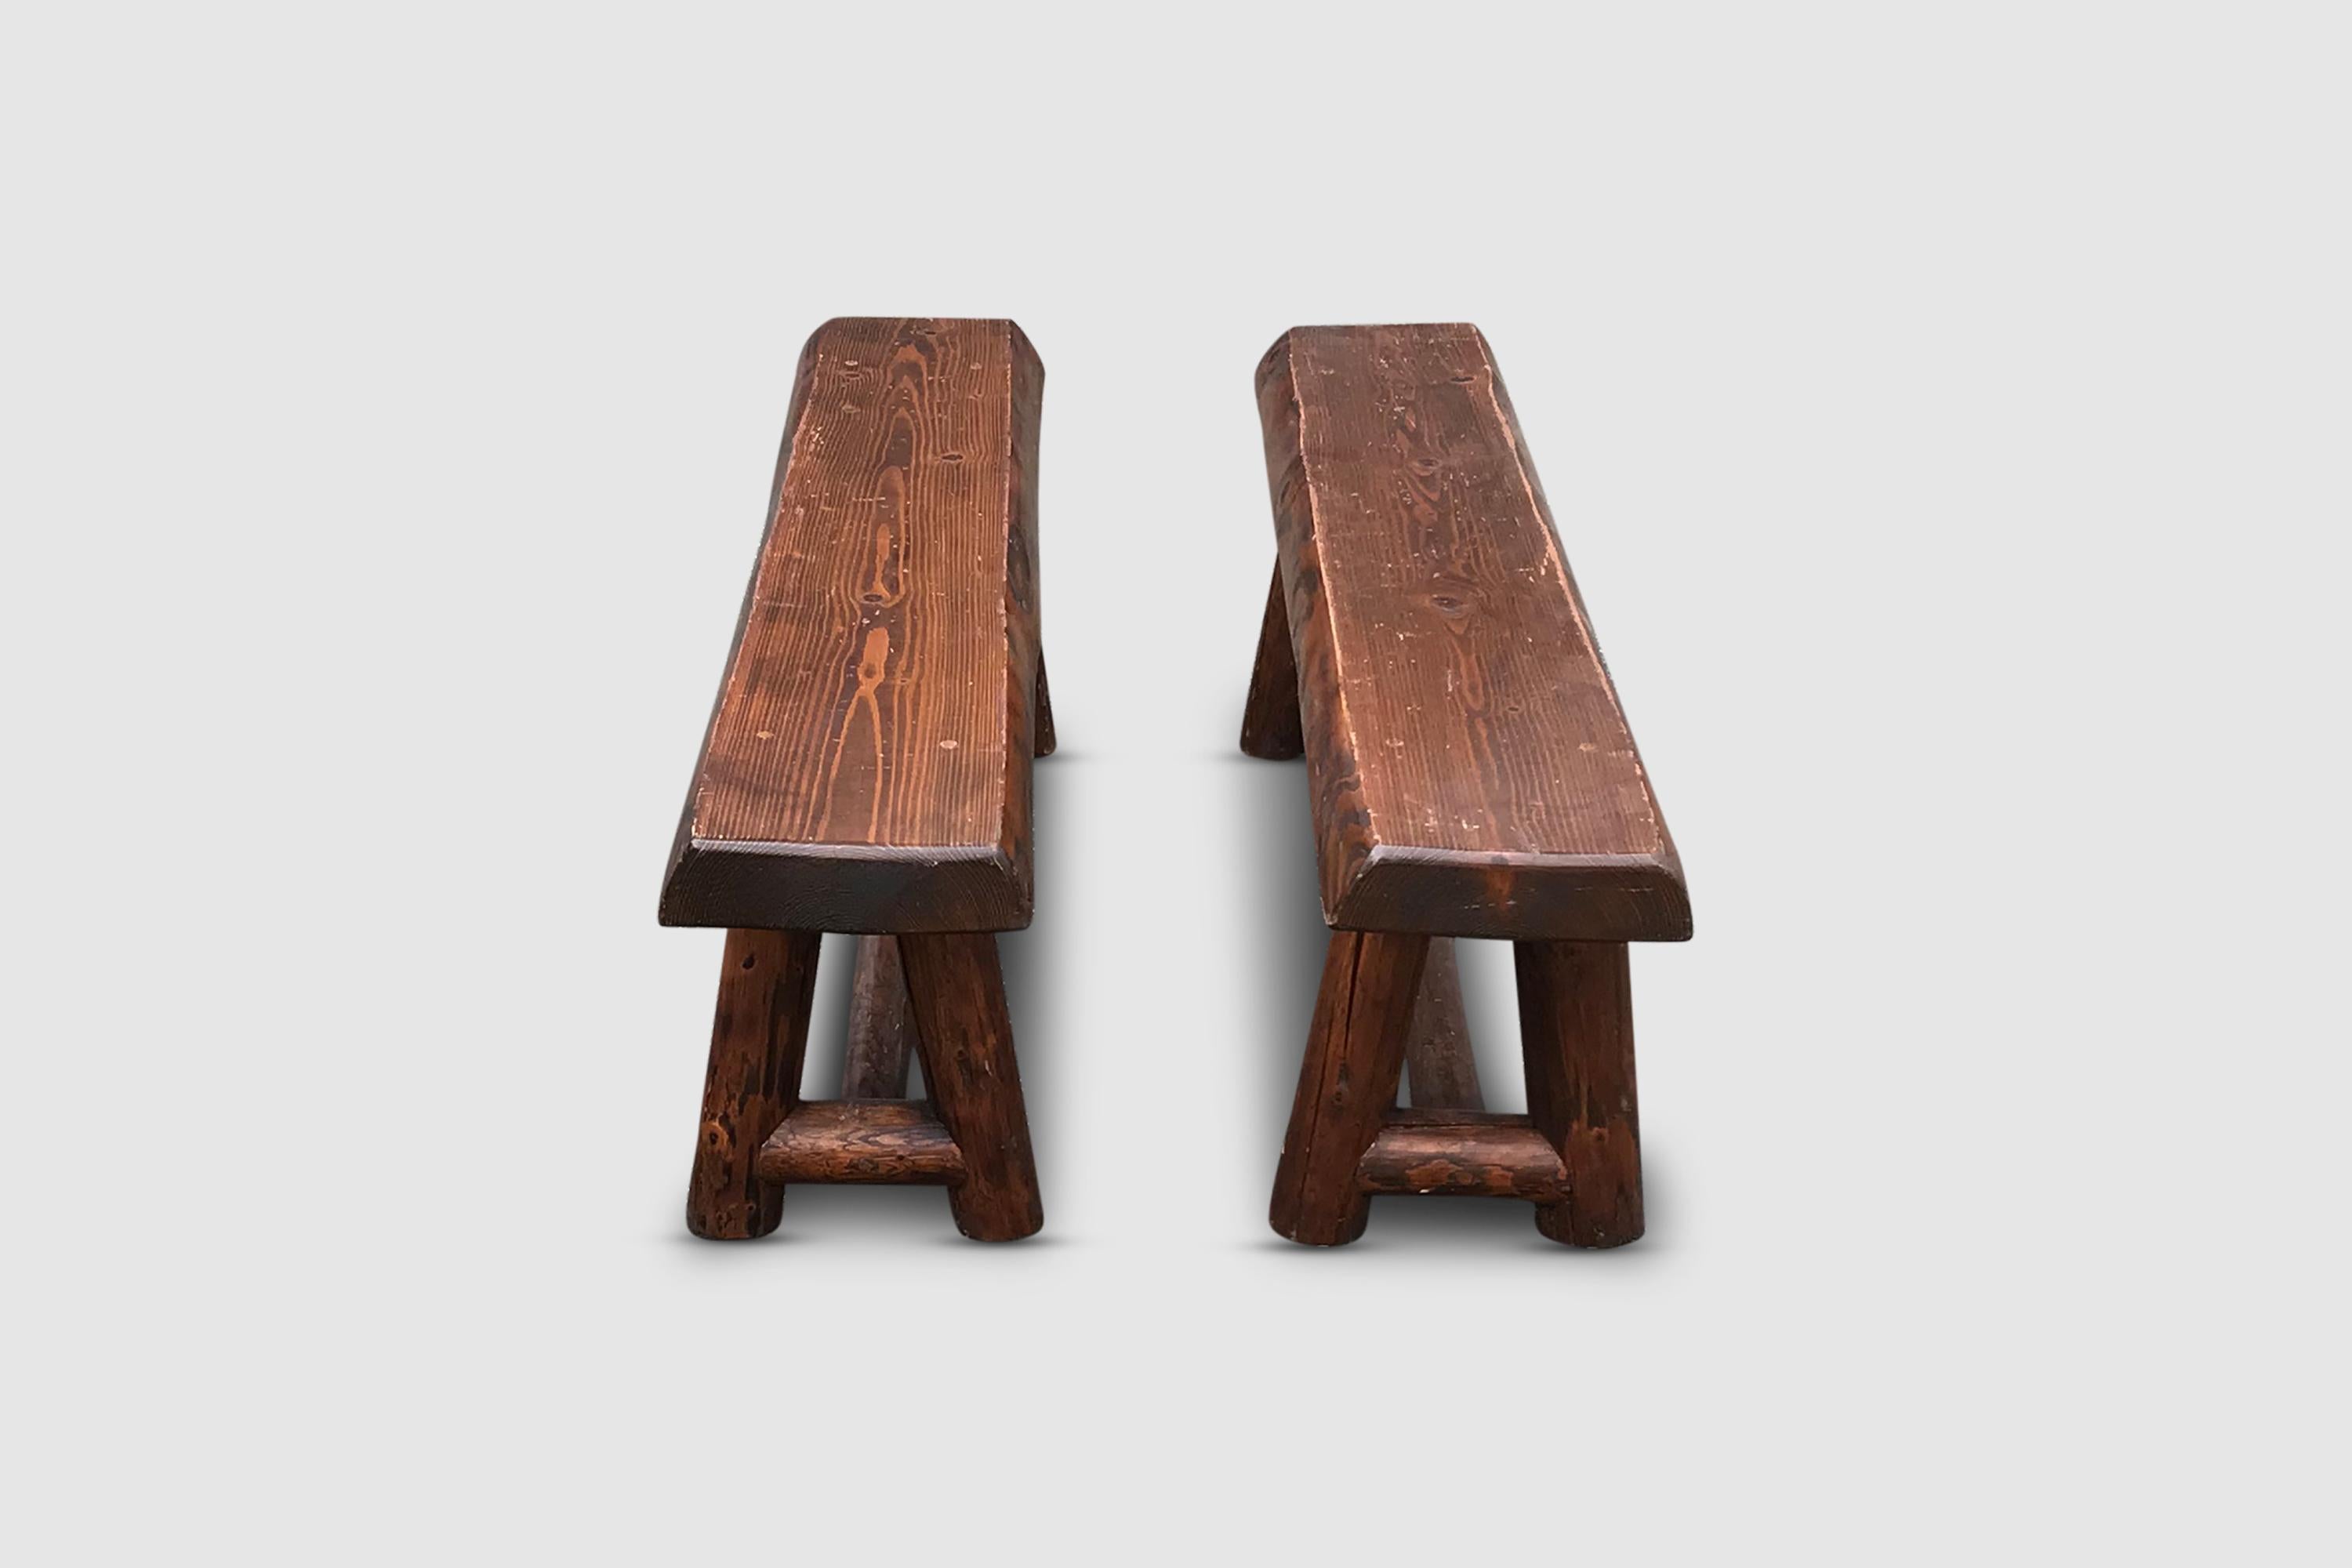 Set of oak benches with an interesting geometry of the feet. Constructed in solid oak with veneered brown color.

The top is constructed in a geometry, with rounded of edges, in the manner of Charlotte Perriand.

The feet are cilinder shaped and